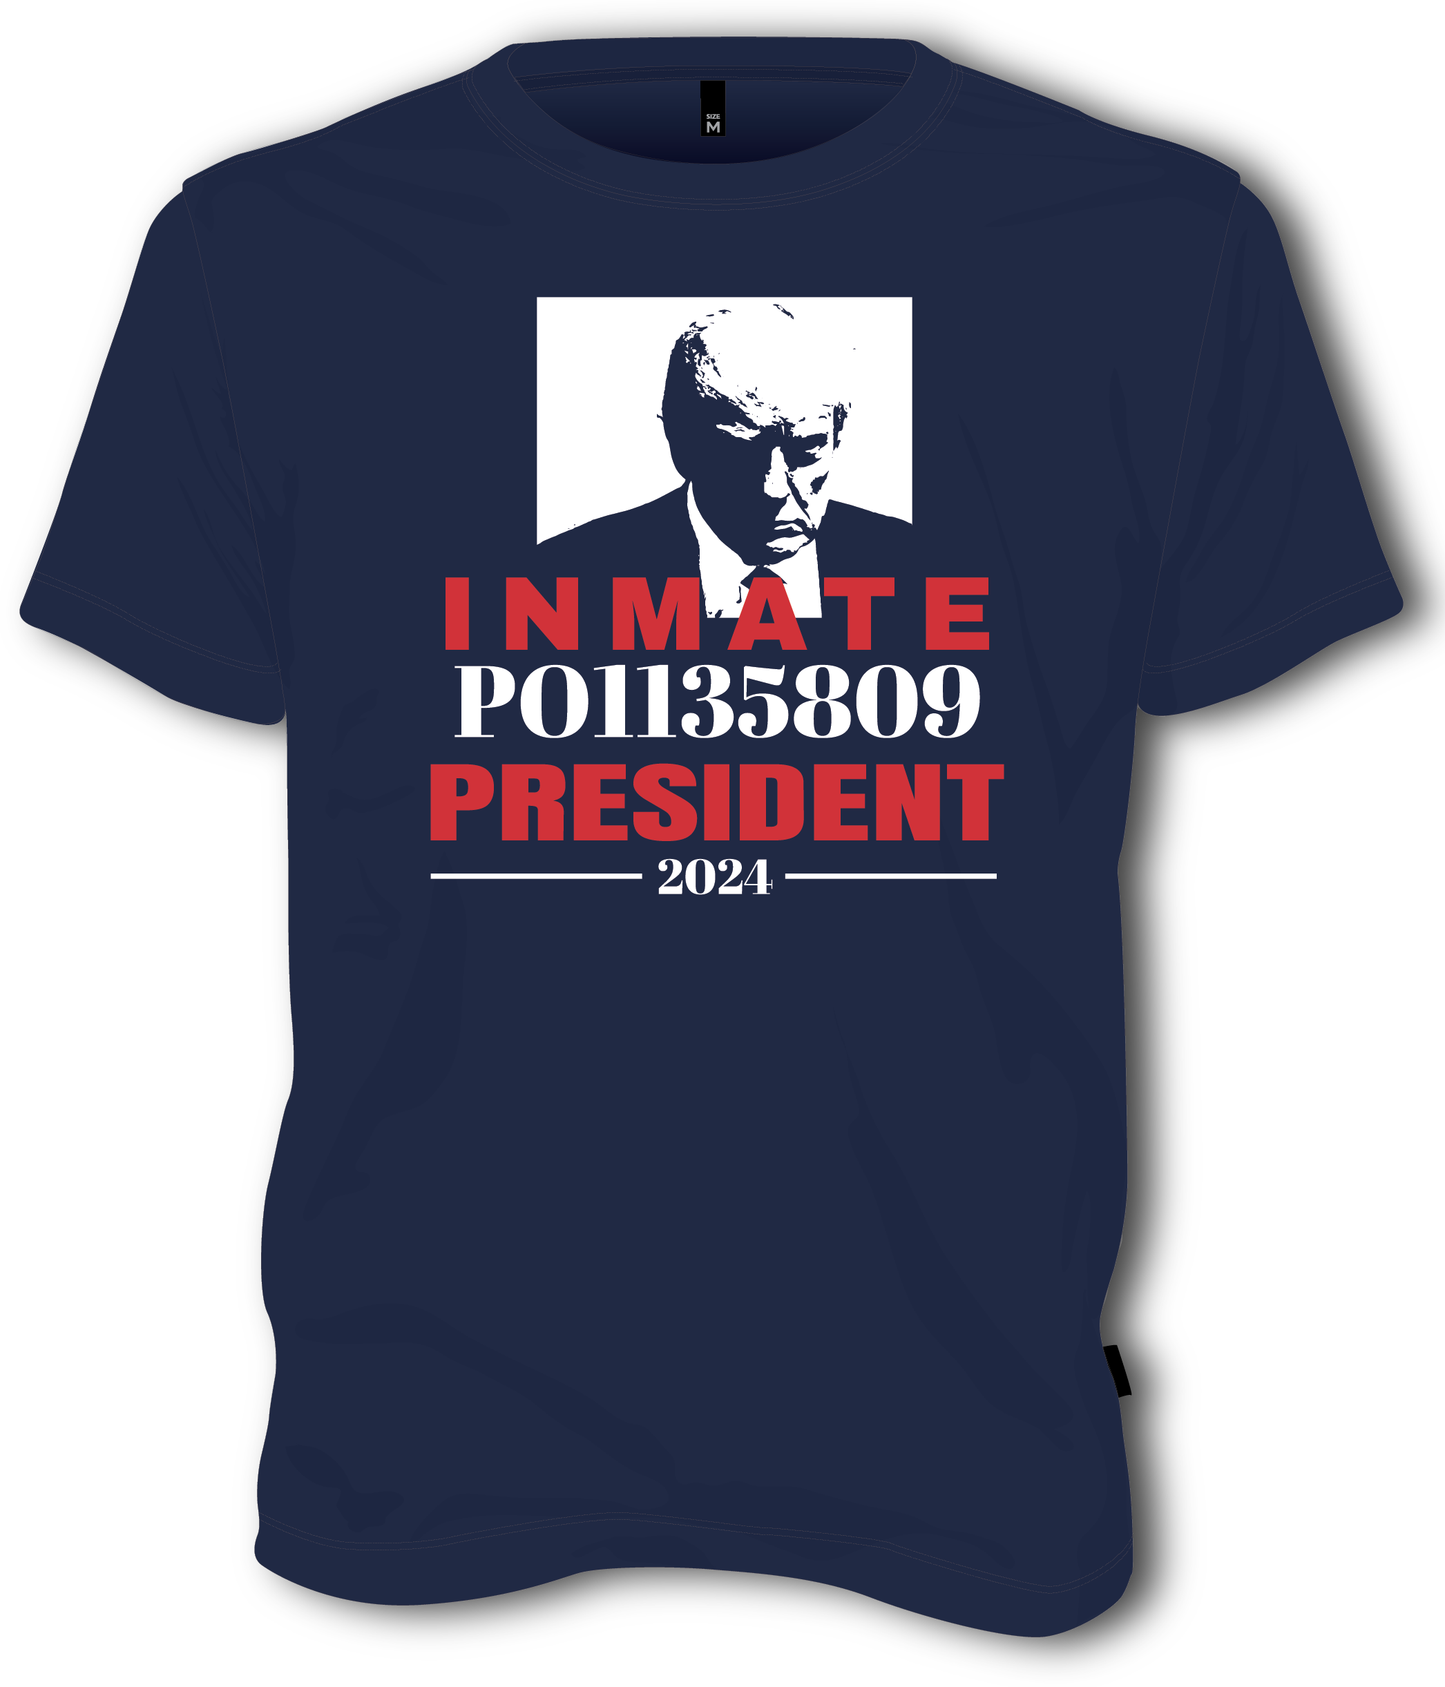 Support Inmate P01135809 For President